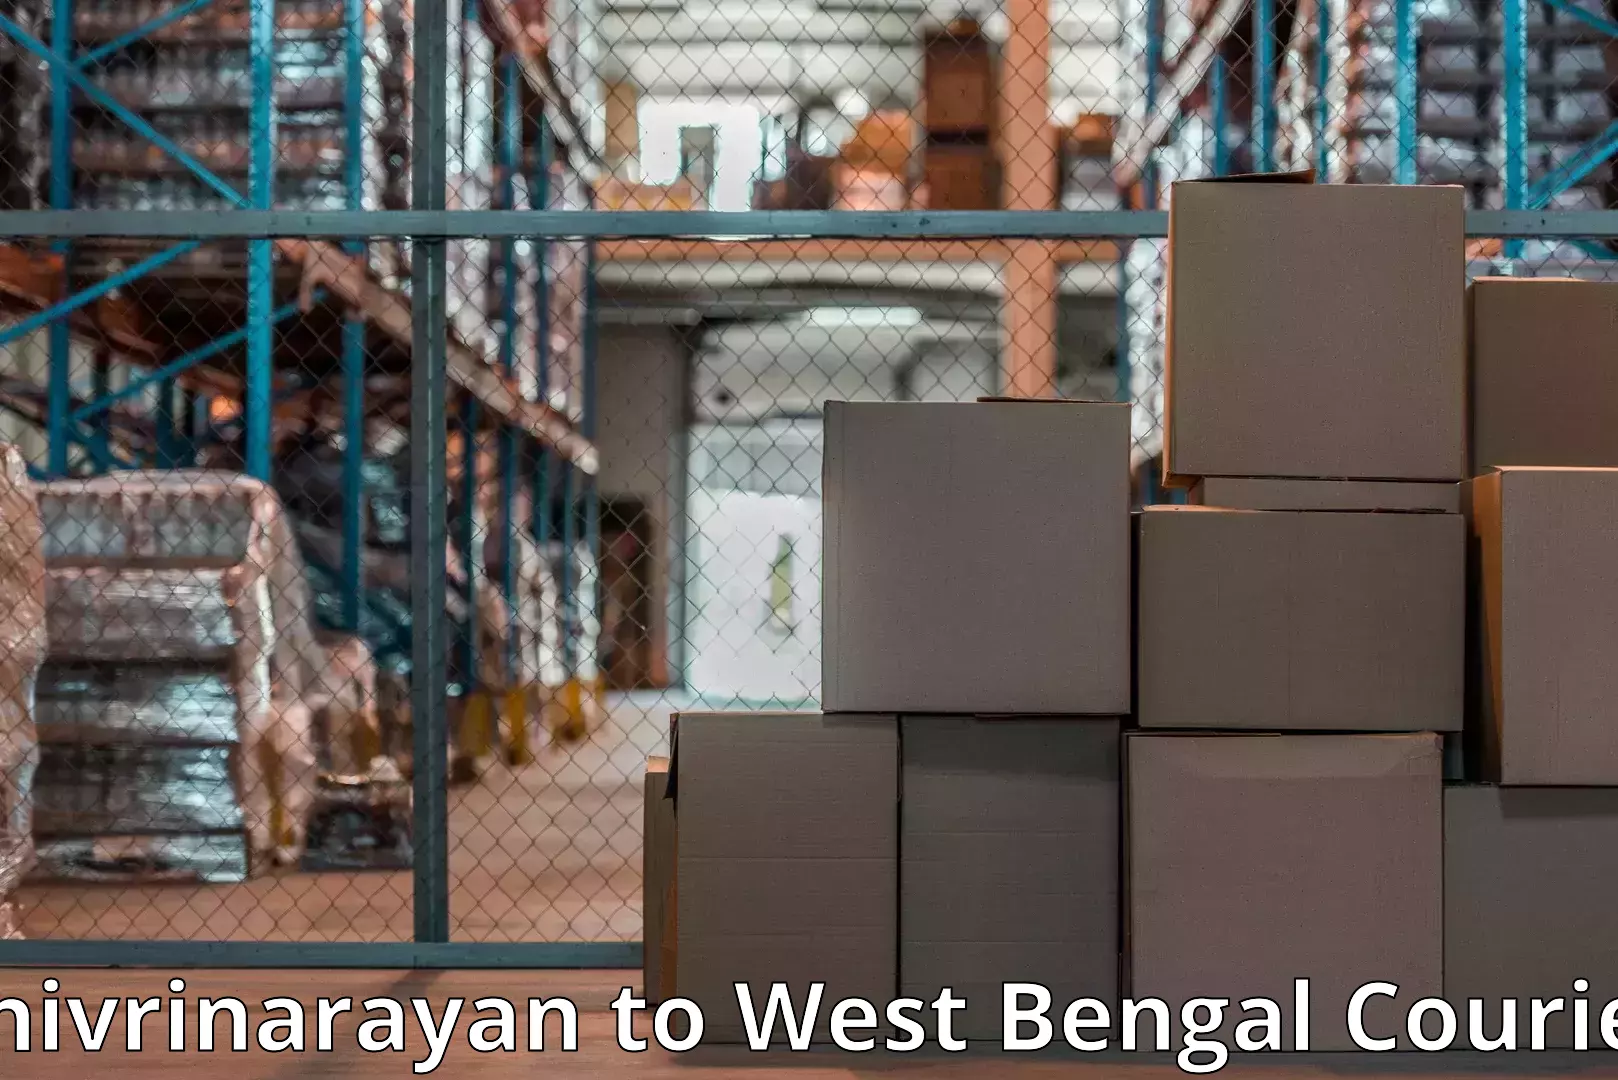 Dependable furniture movers Shivrinarayan to West Bengal